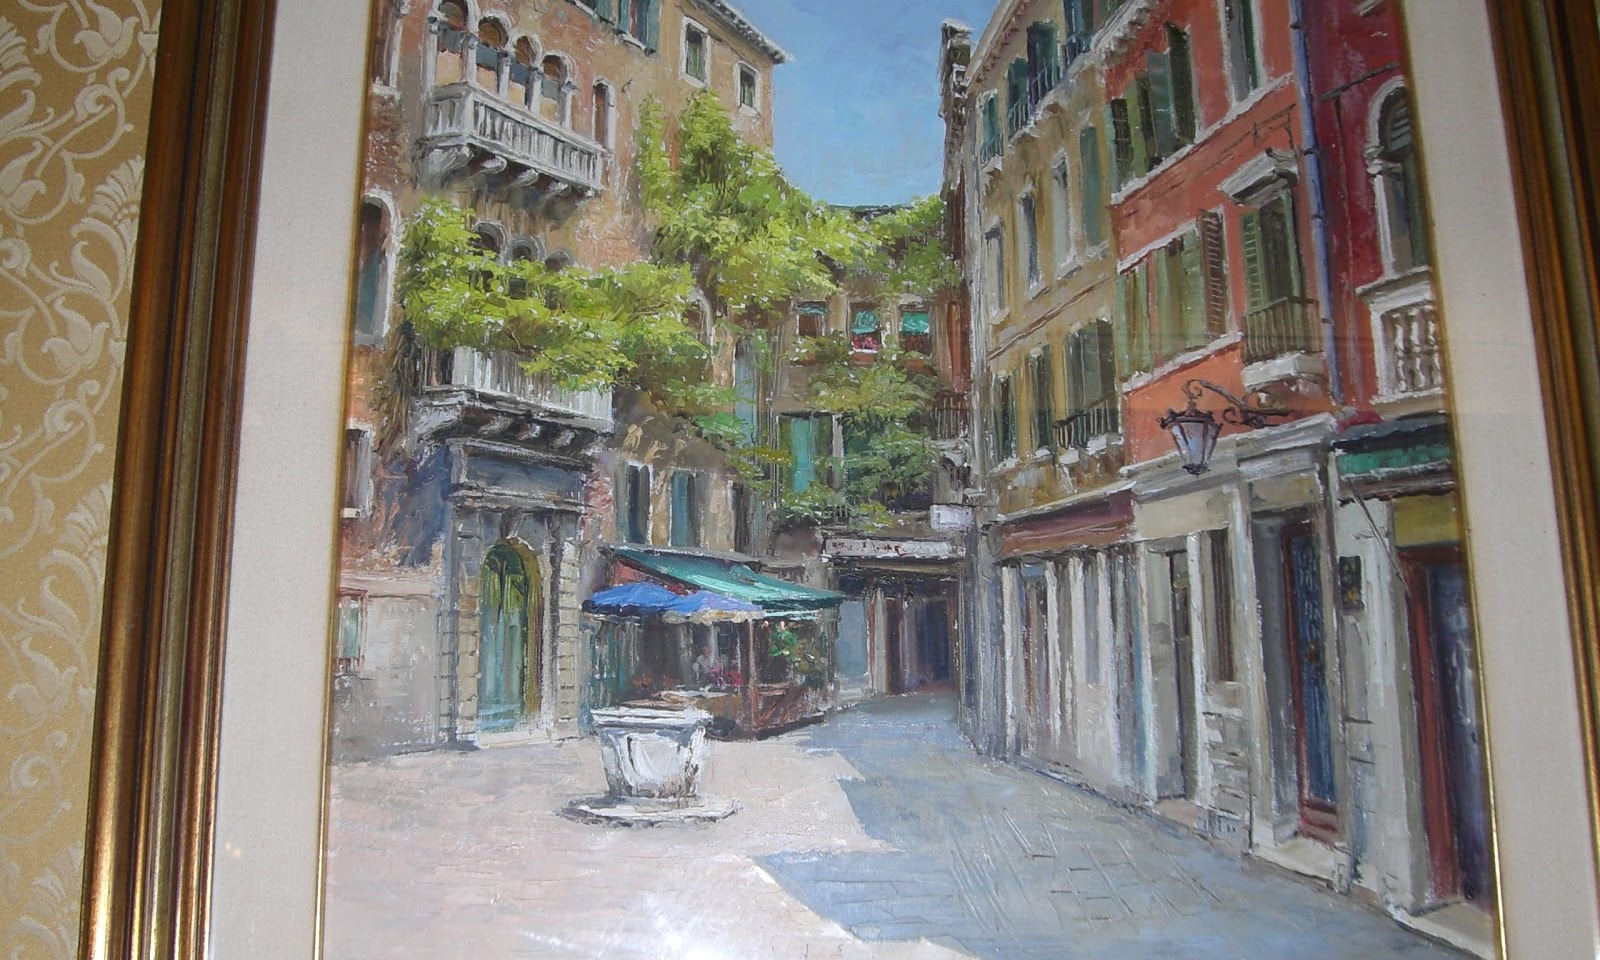 The Wisteria - A painting of Campo San Provolo